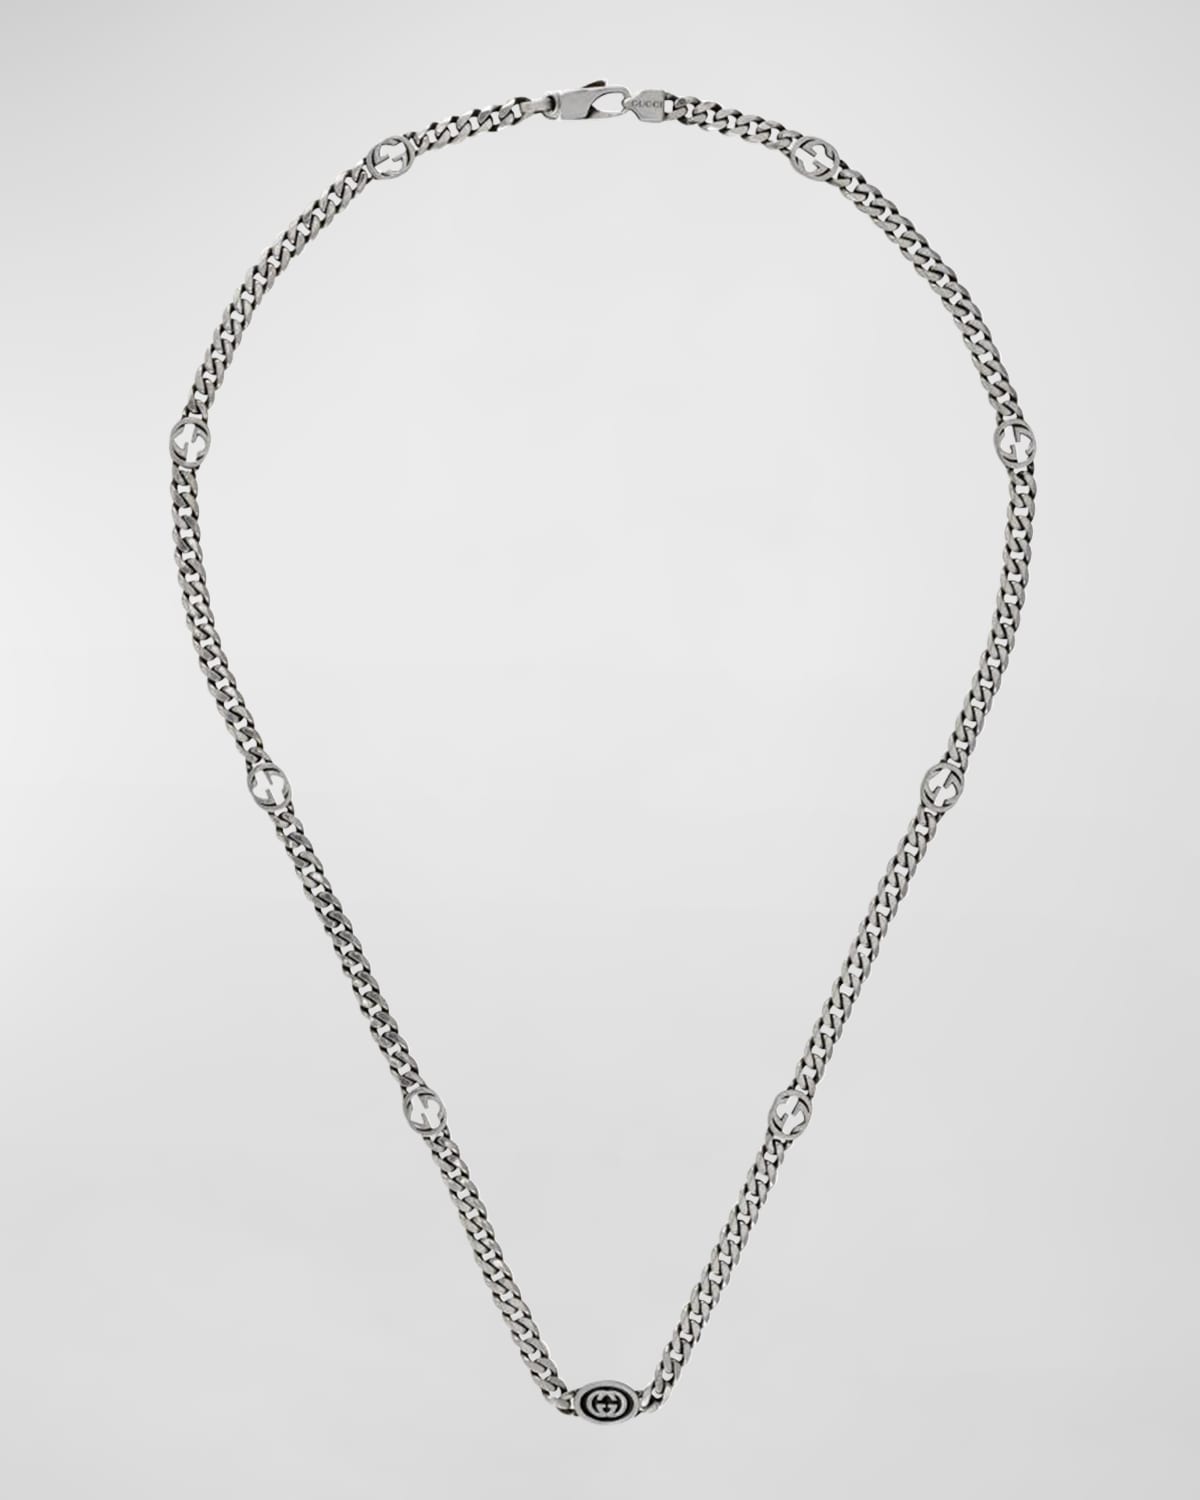 Gucci Men's Enameled Interlocking G Sterling Silver Chain Necklace